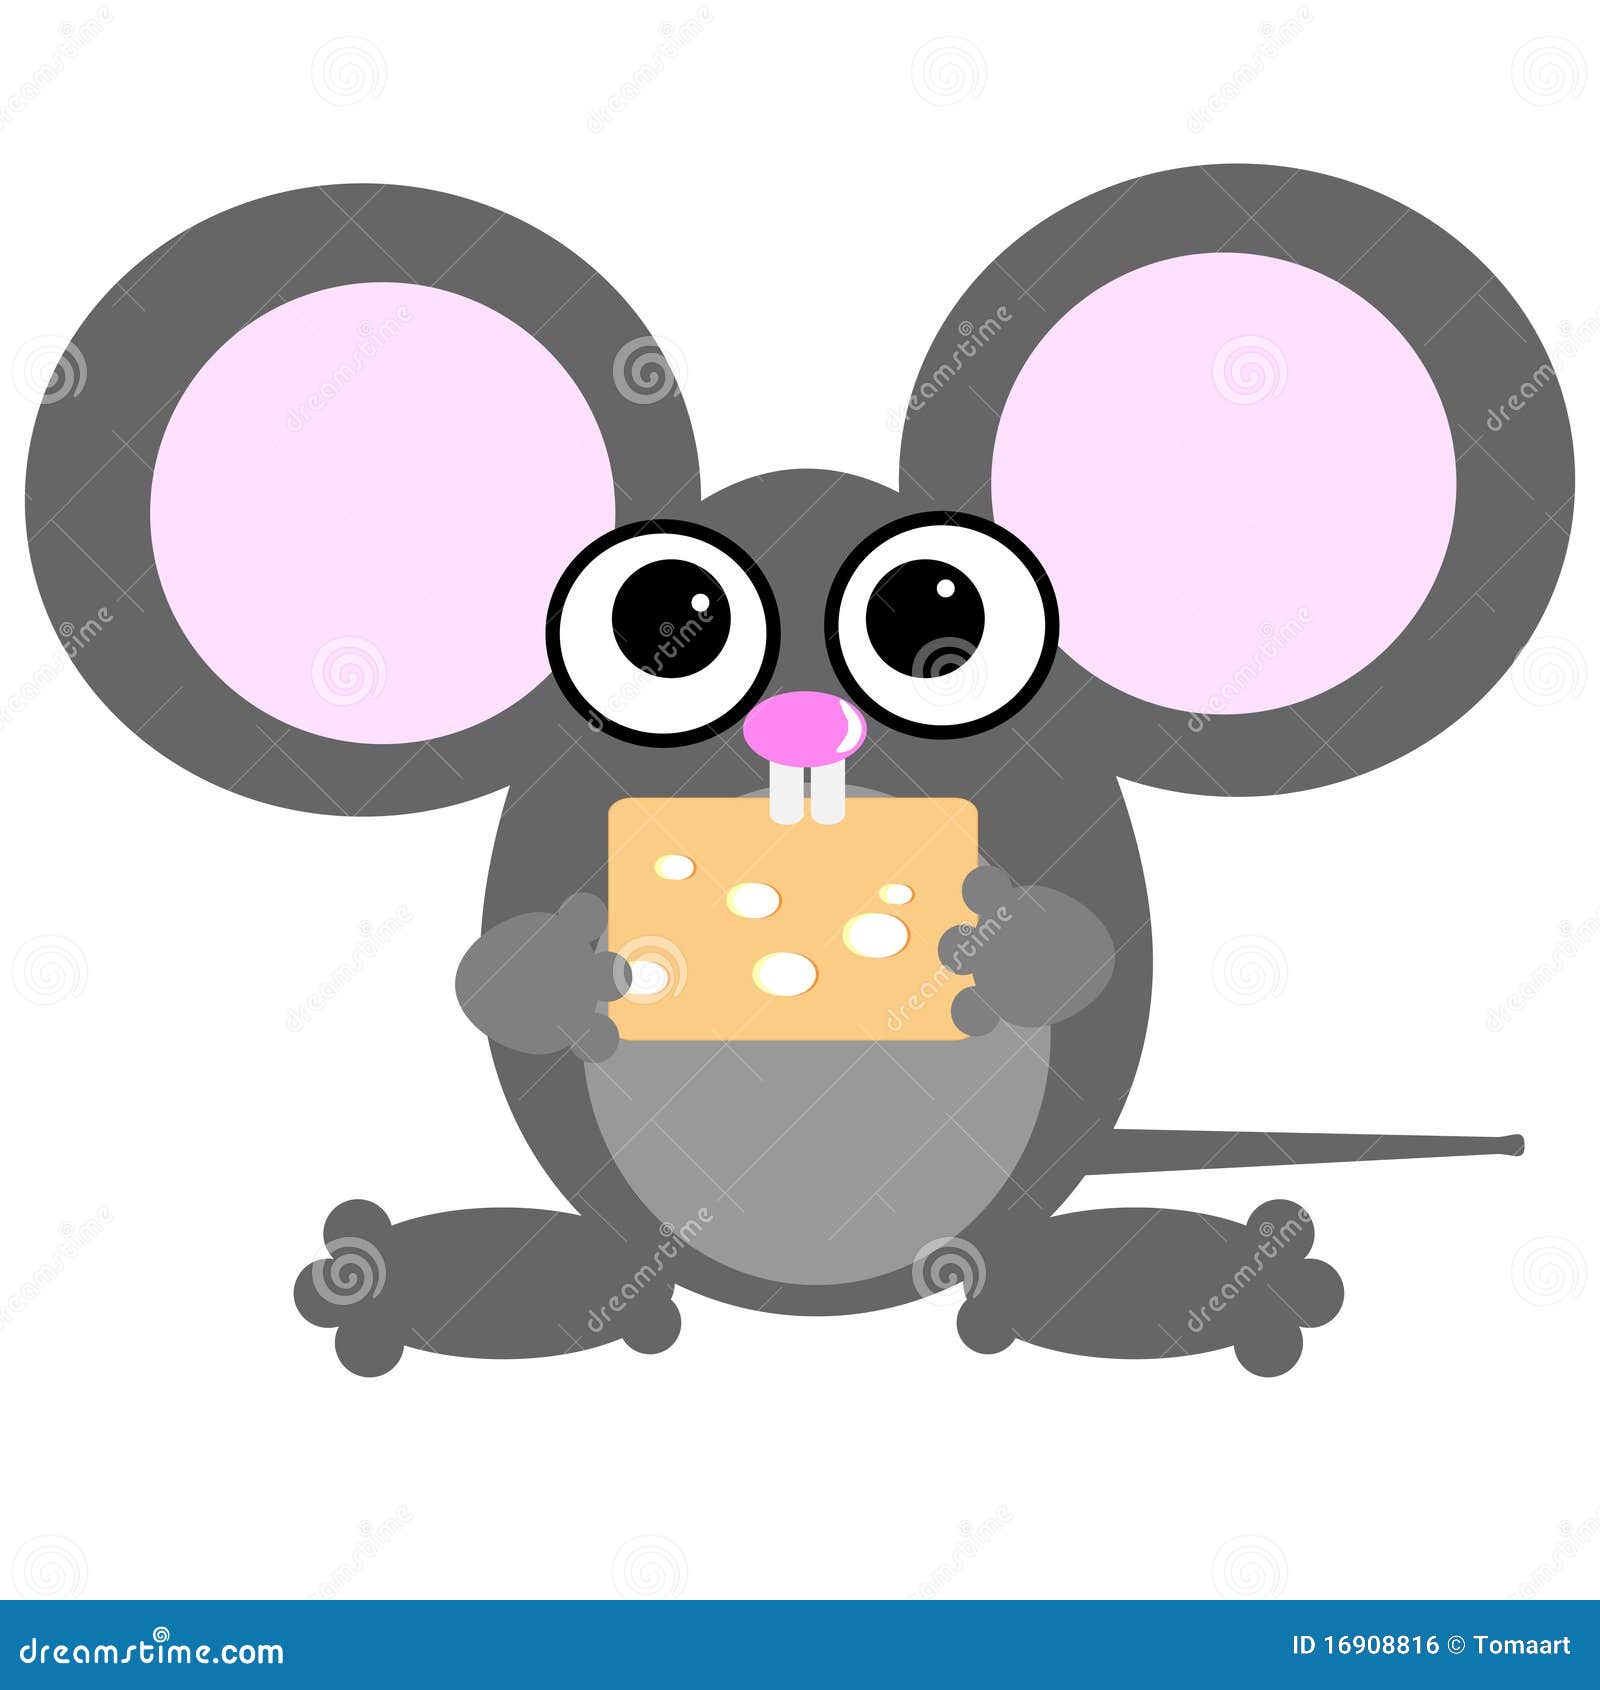 Cartoon mouse stock vector. Illustration of little, background - 16908816